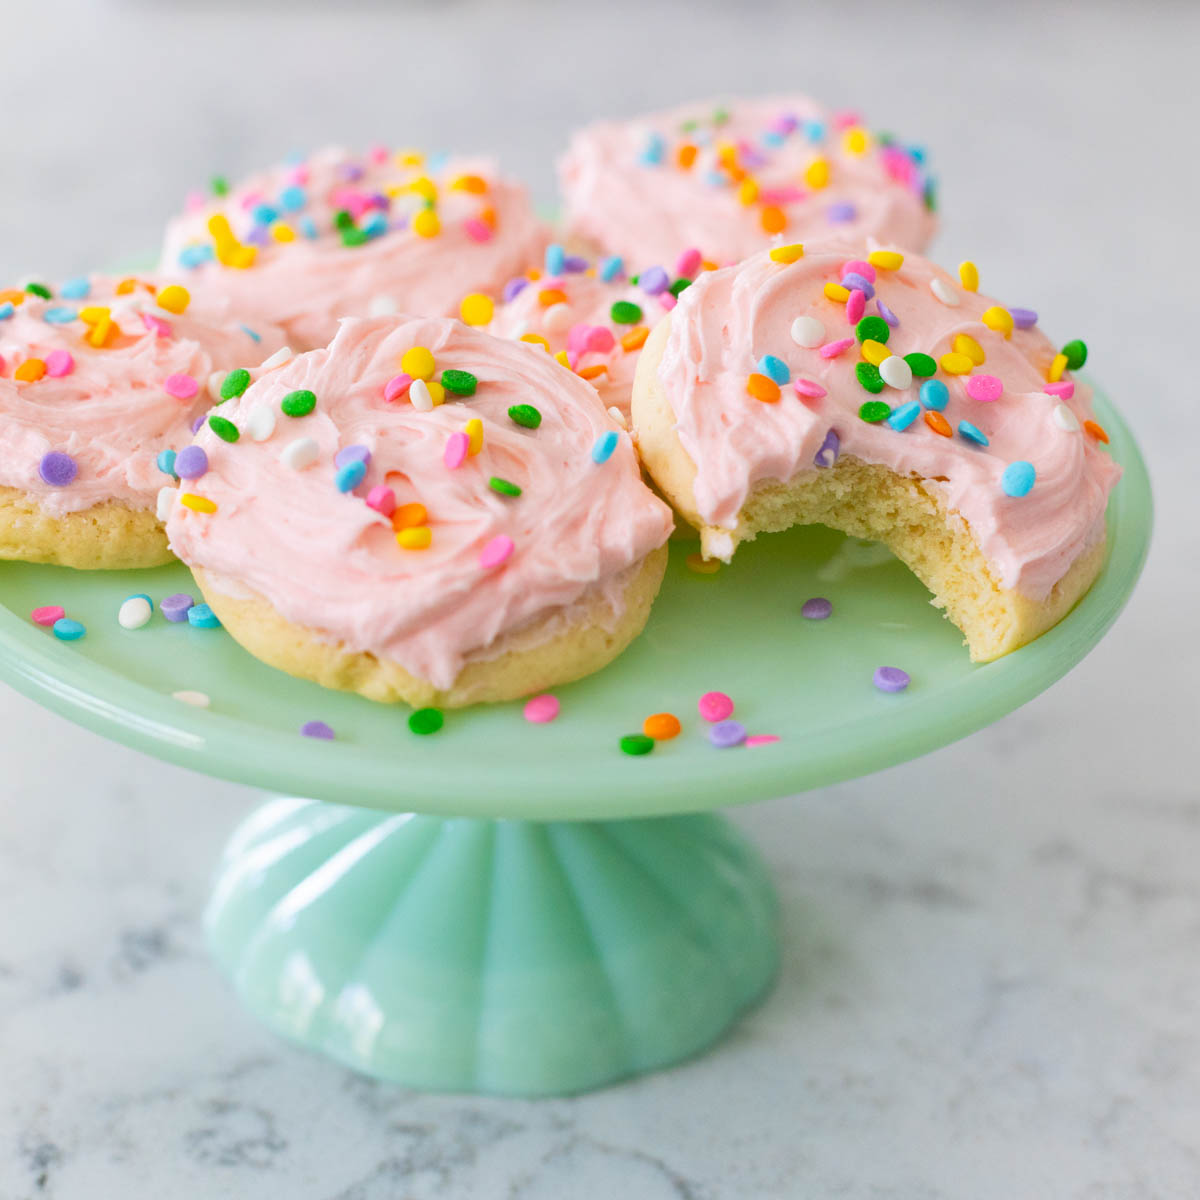 An aqua cake plate has 5 soft frosted sugar cookies decorated with pink icing and sprinkles. One cookie has a bite taken out of it.